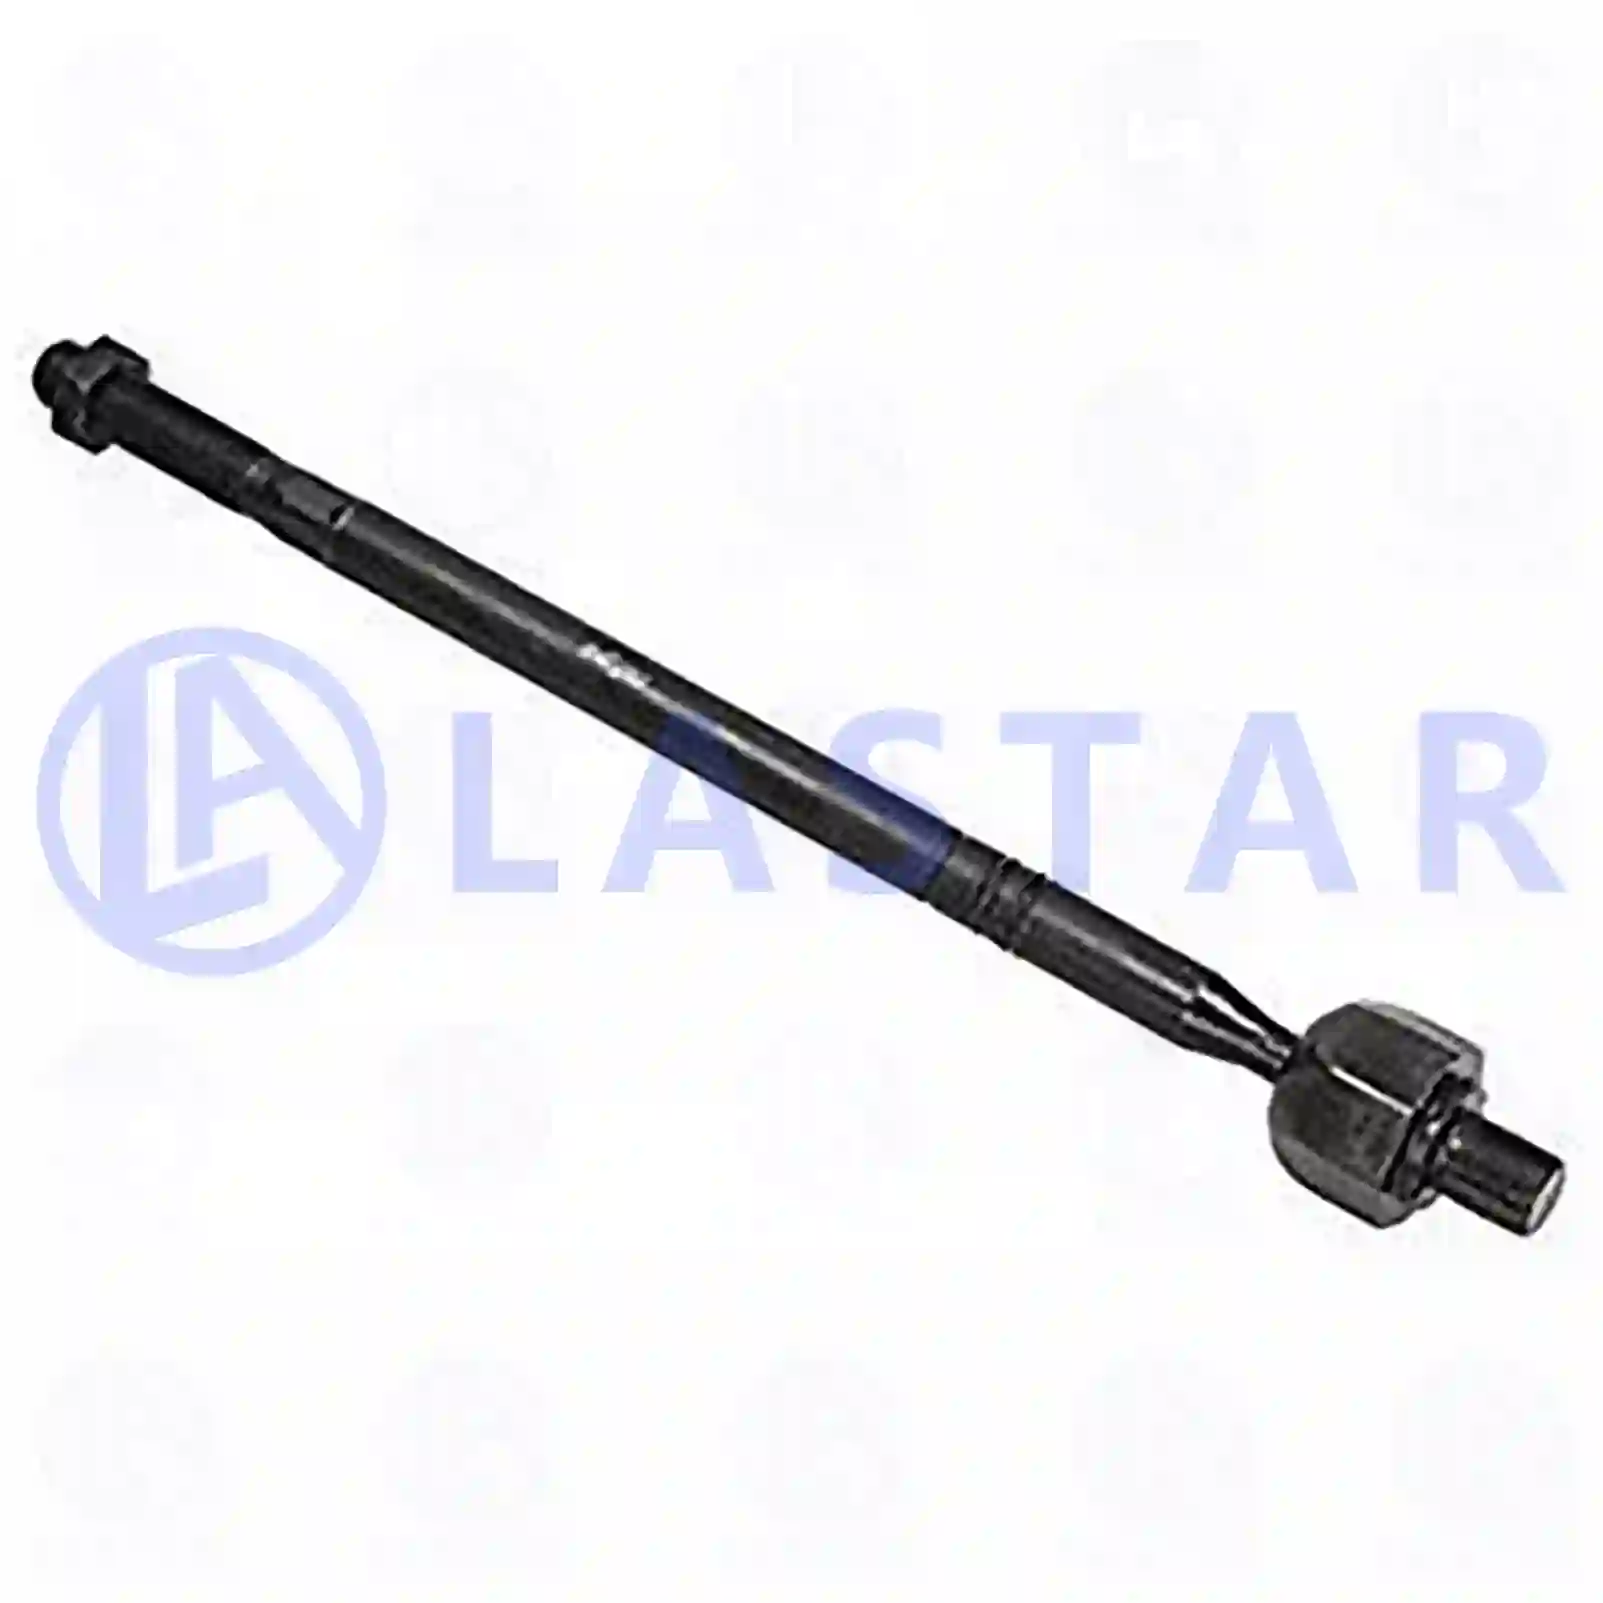  Steering gear || Lastar Spare Part | Truck Spare Parts, Auotomotive Spare Parts